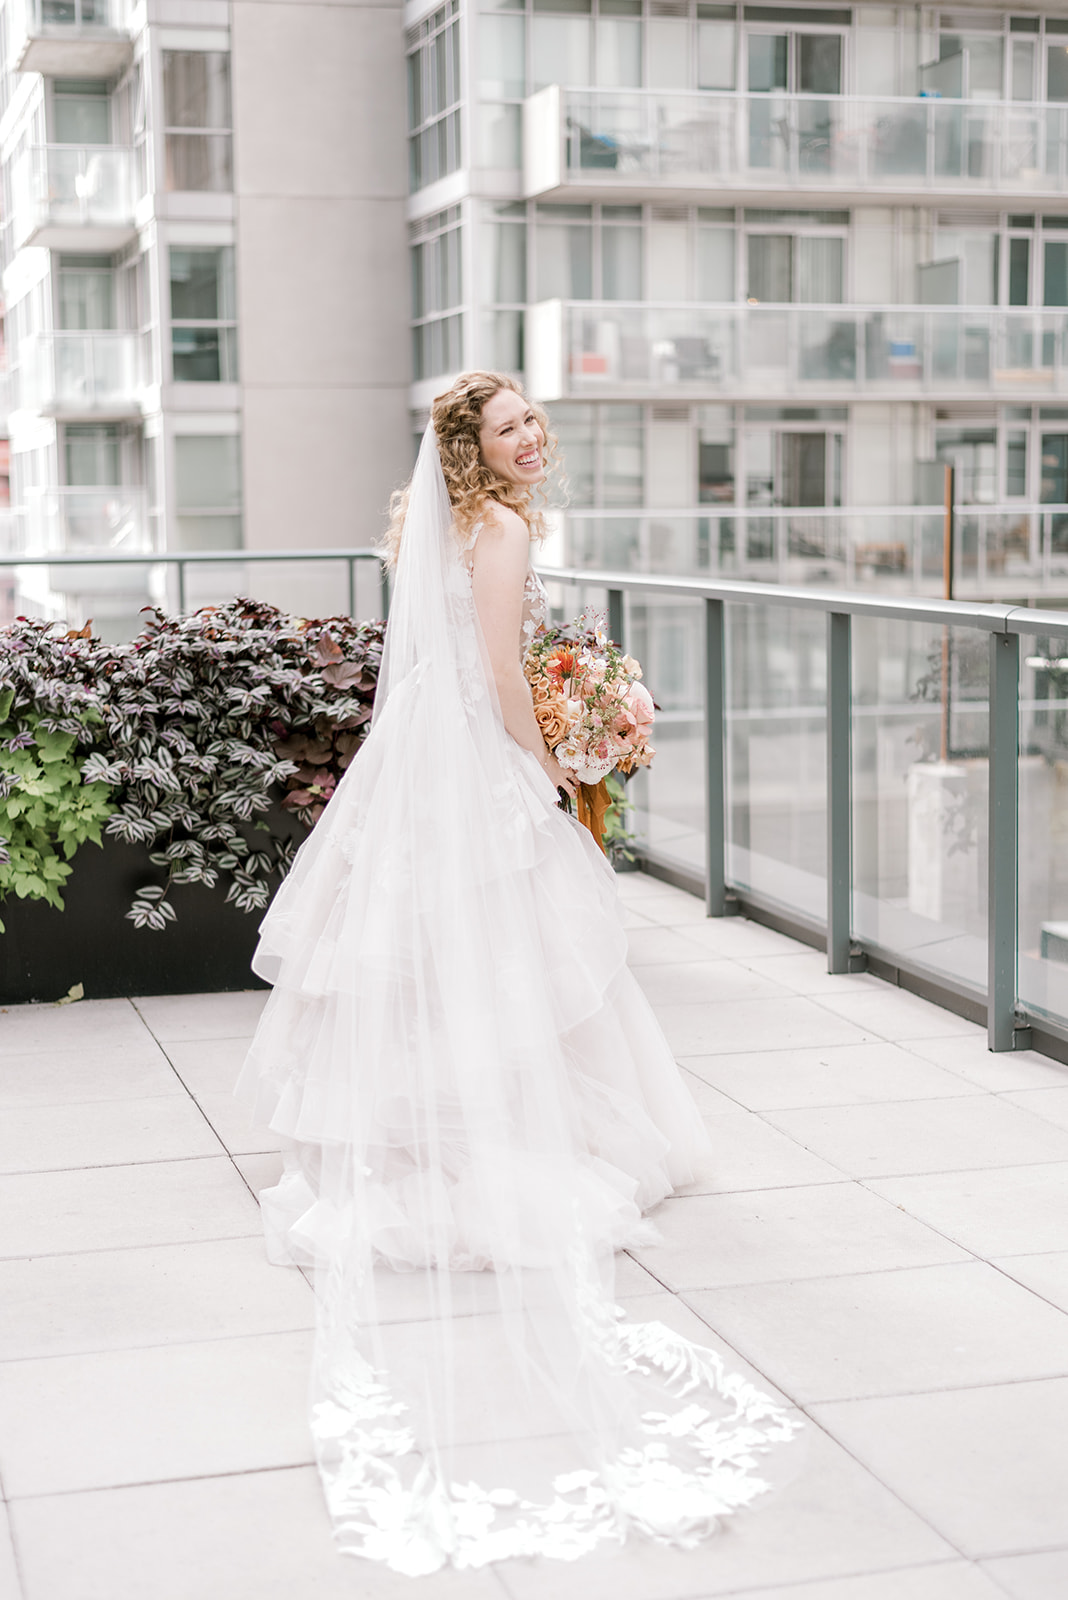 Bridal Portrait on Rooftop Downtown Toronto